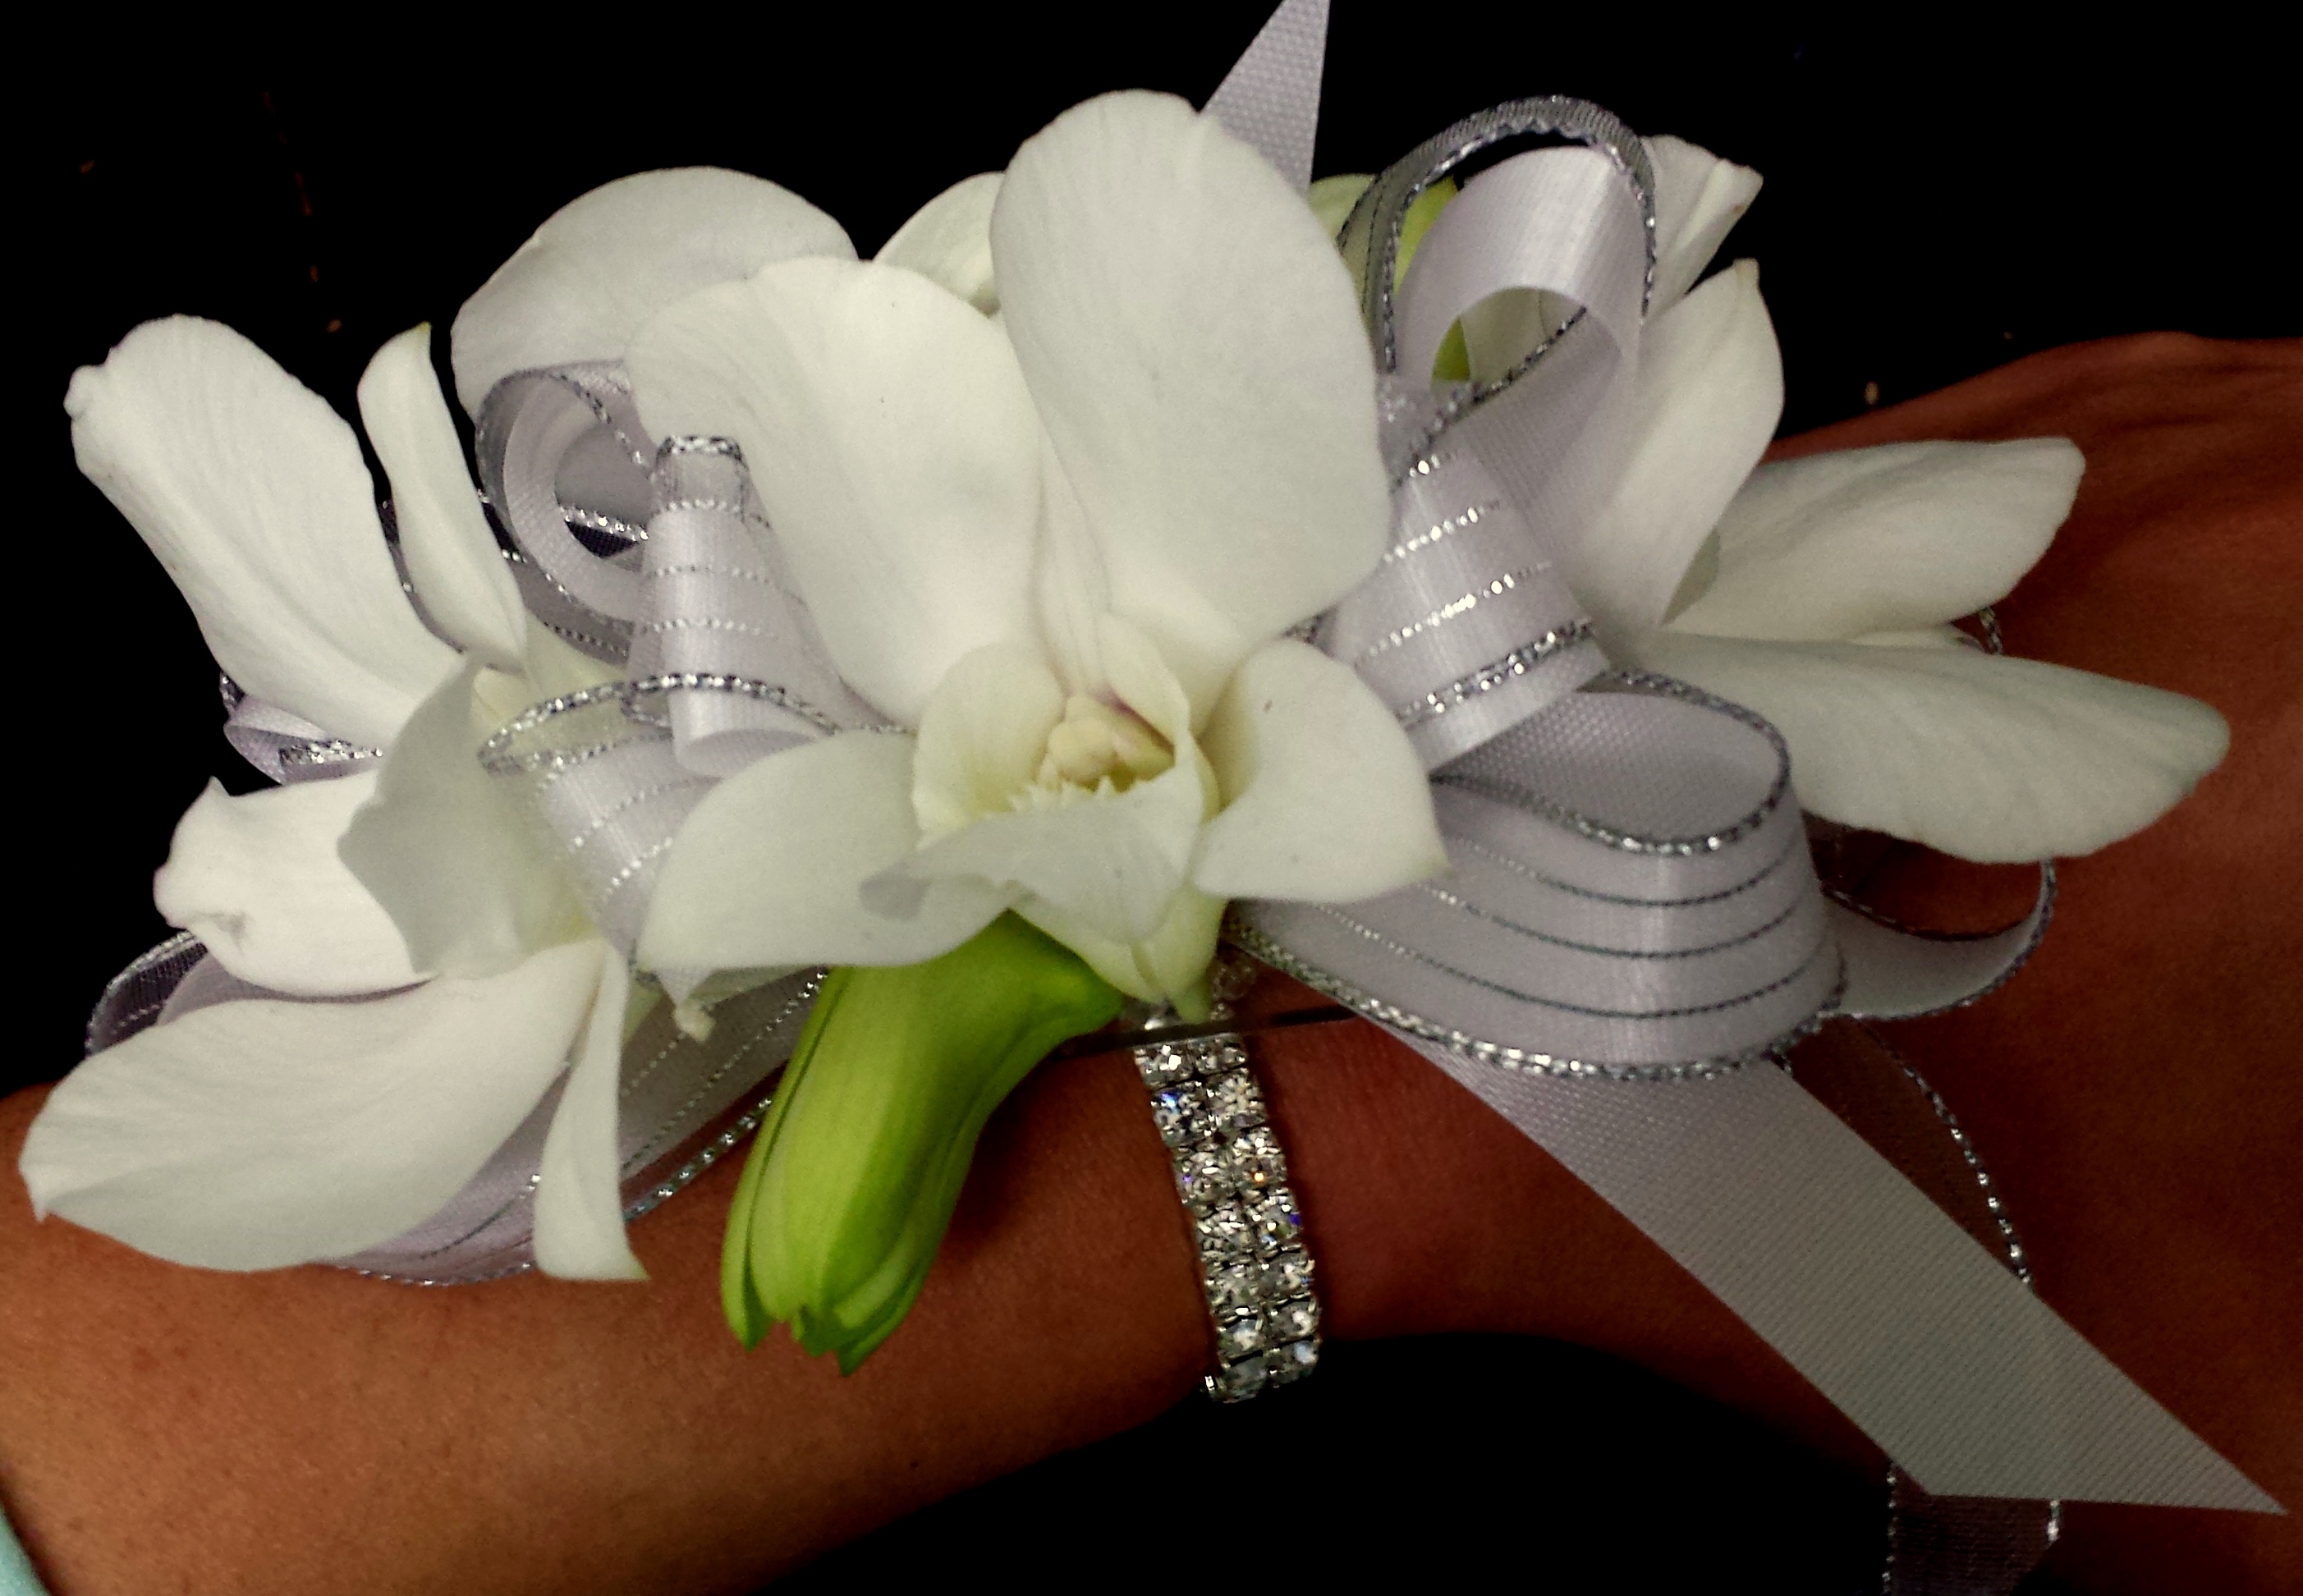 Grande Flowers' "Sophisticated" White Orchid Wrist Corsage | Grande Flowers